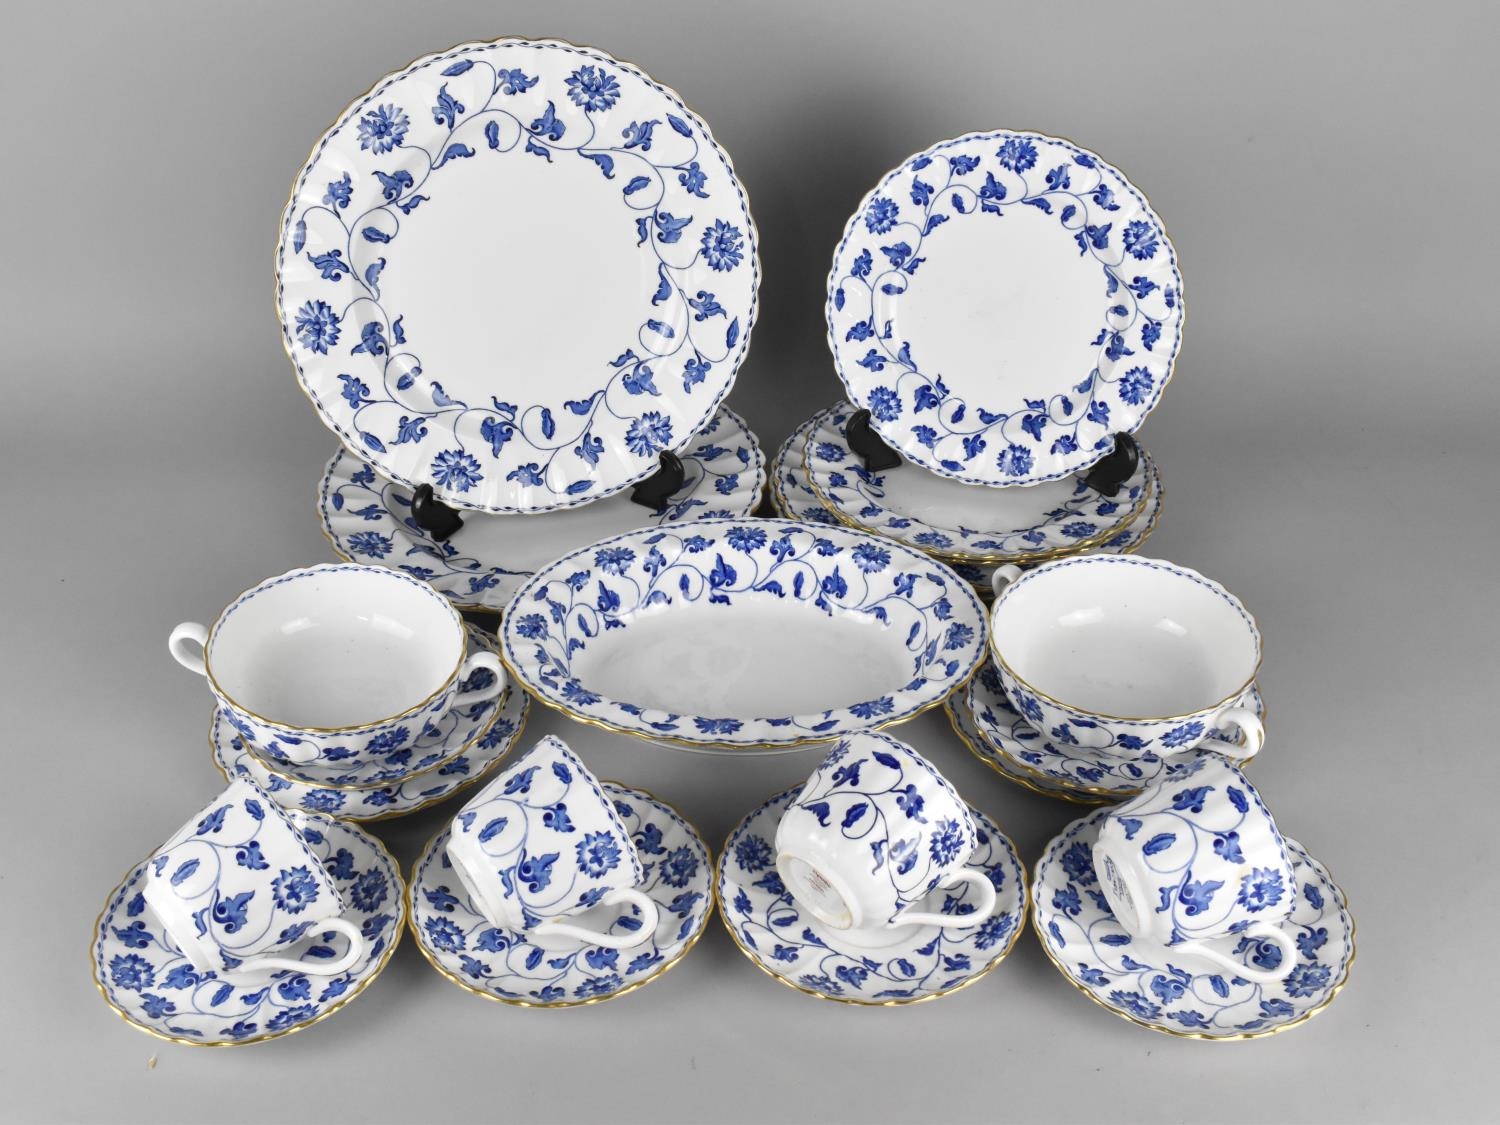 A Collection of Spode Colonel China to Comprise Two Large Plates, Two Medium Plates, Three Small